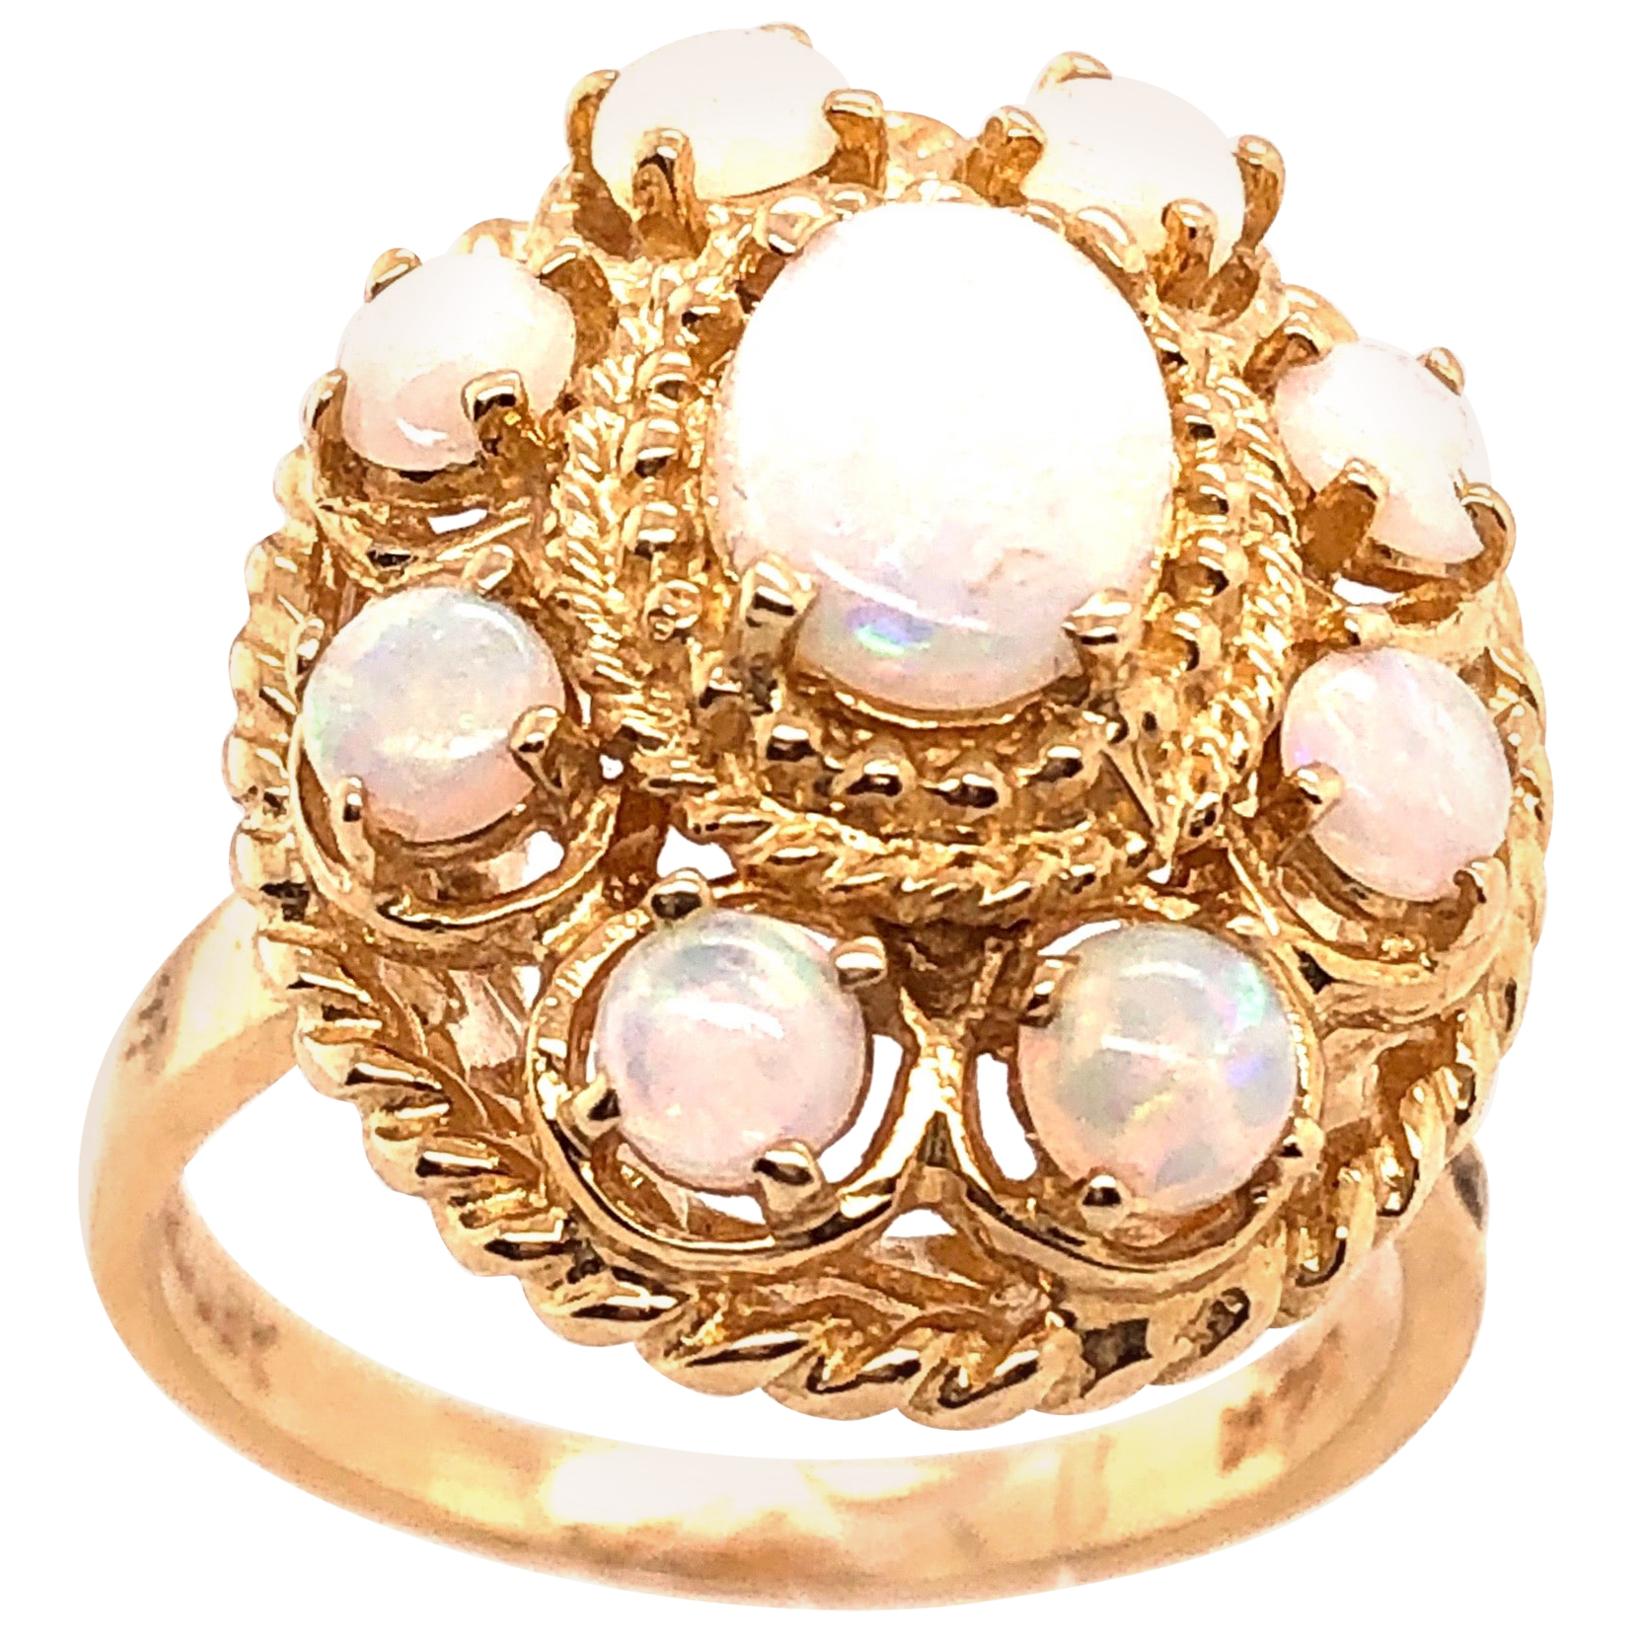 14 Karat Yellow Gold Ring with Opal Cluster